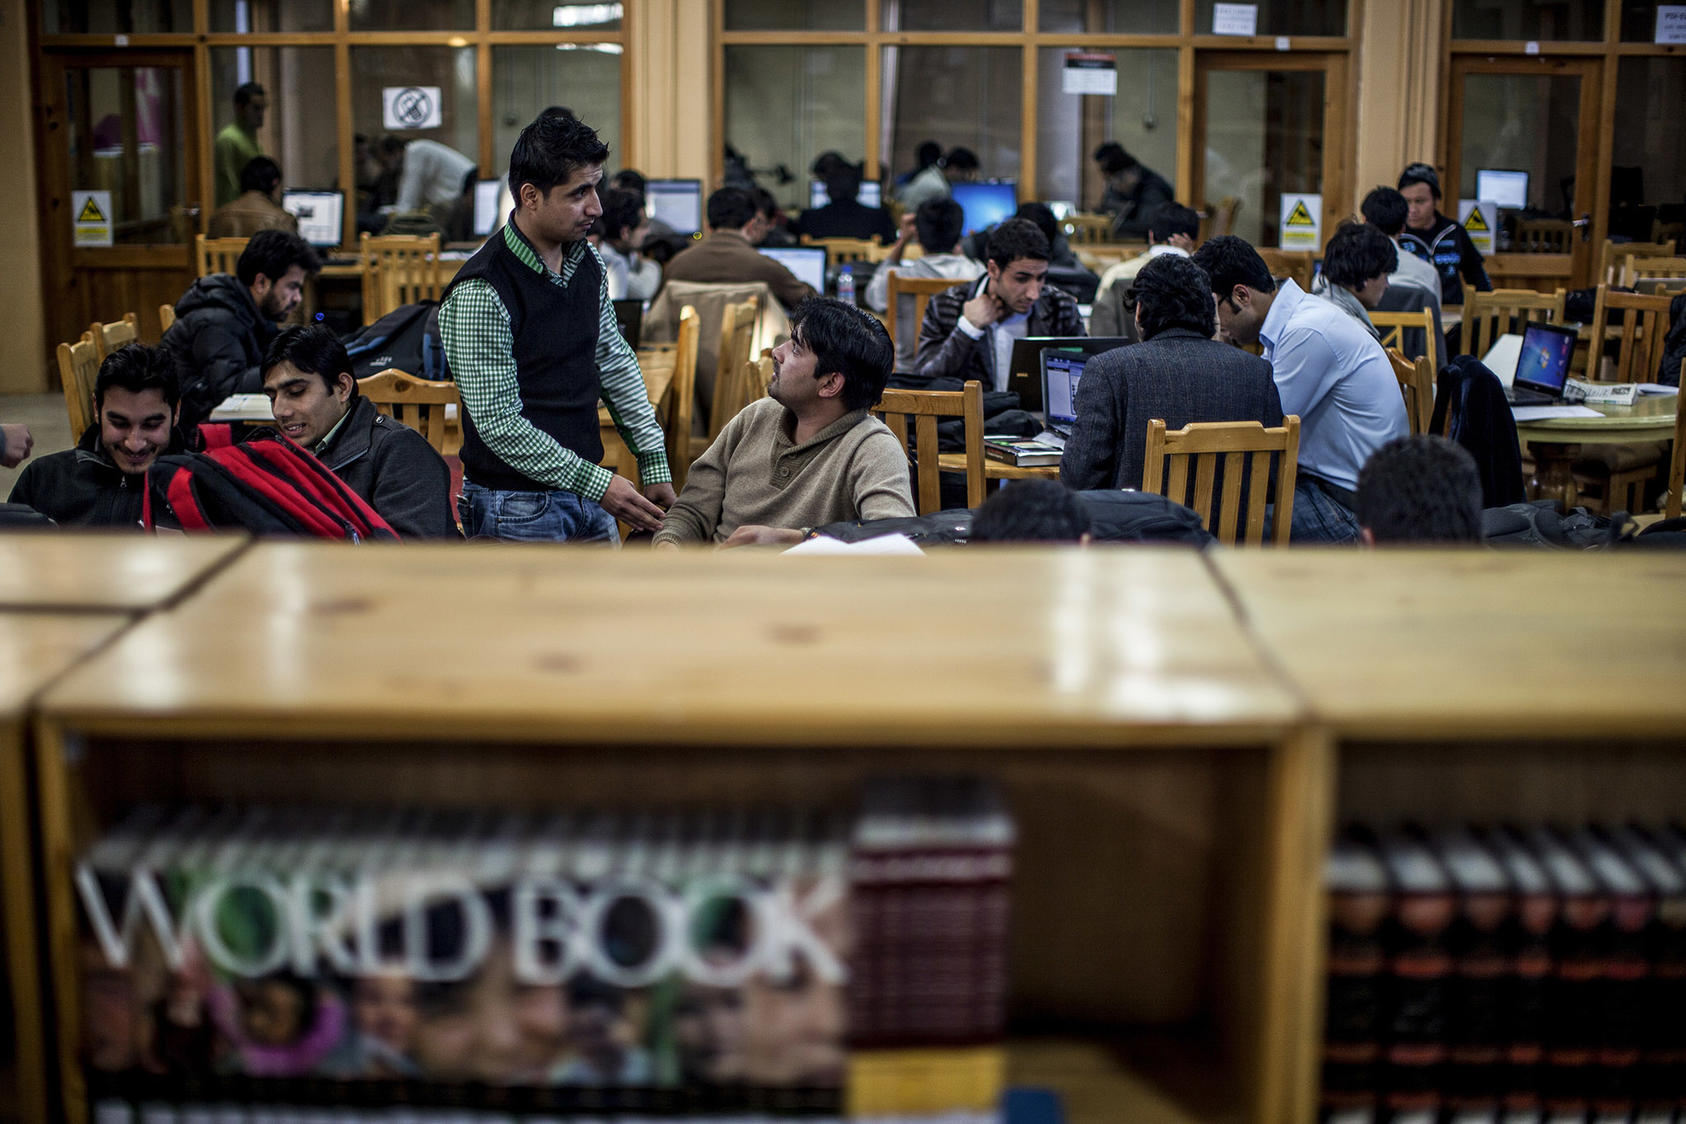 Students at the American University of Afghanistan study in the library in Kabul, Afghanistan. (Bryan Denton/The New York Times)